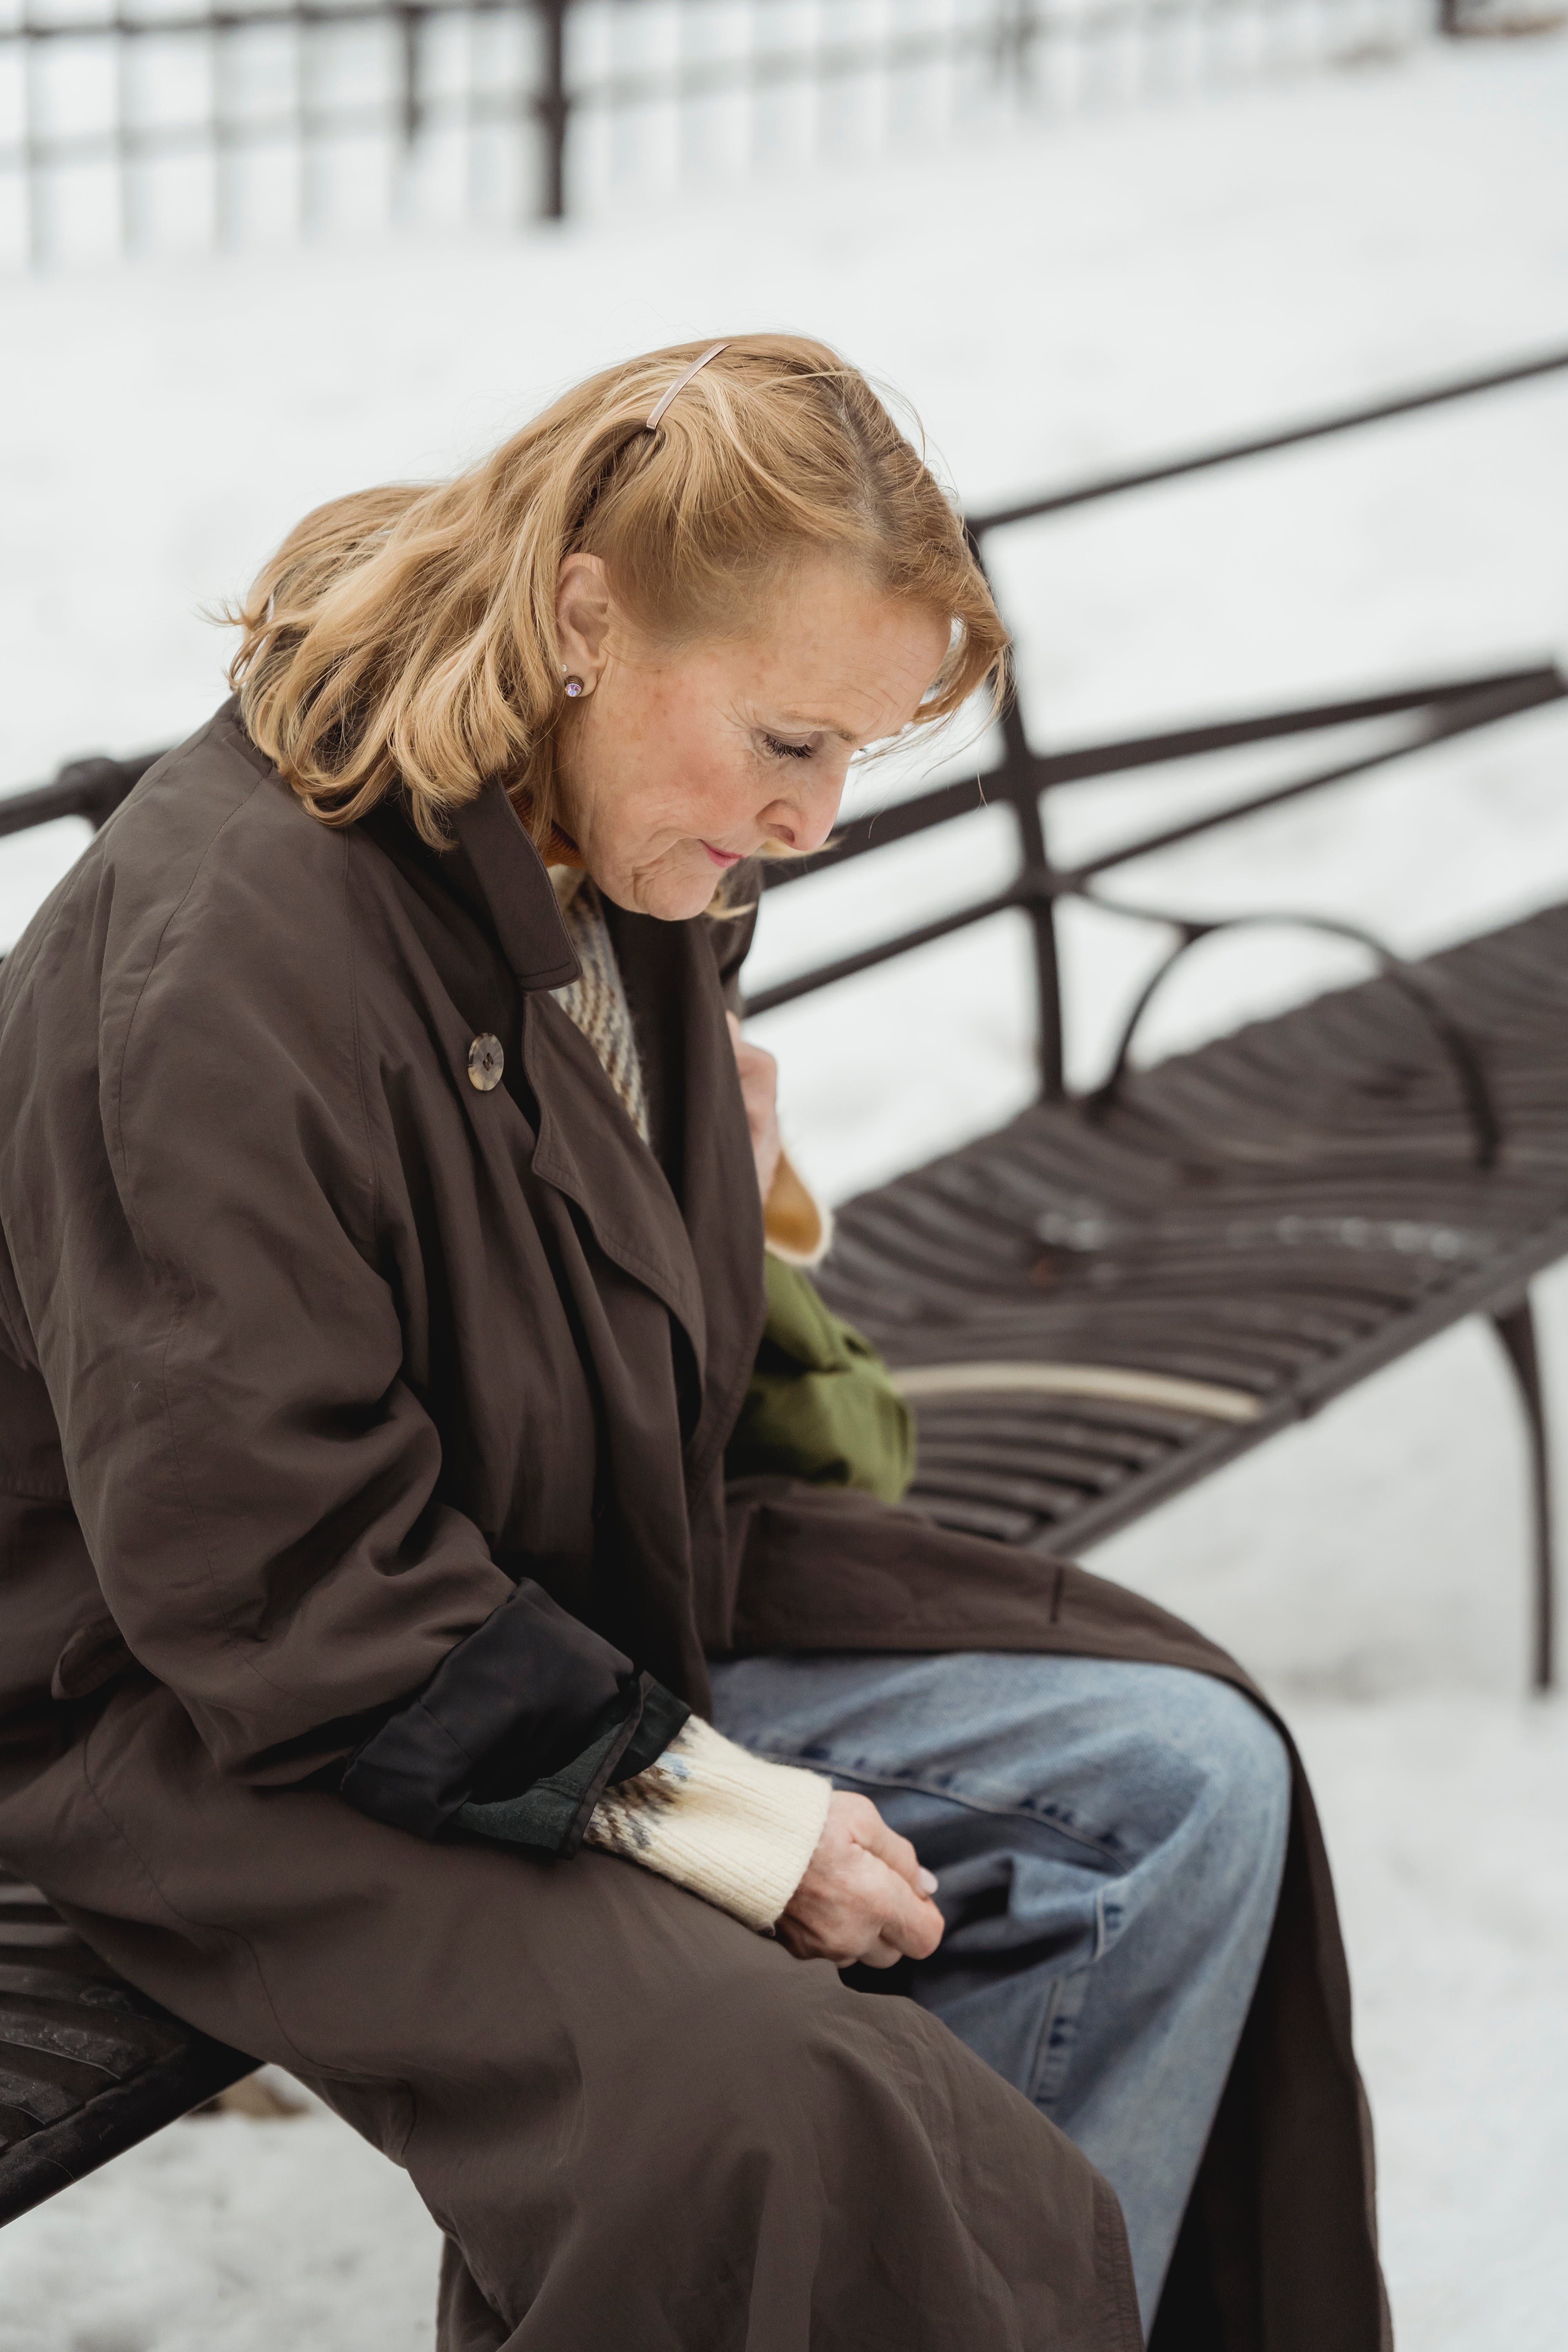 An older woman looking depressed while sitting on a bench | Source: Pexels